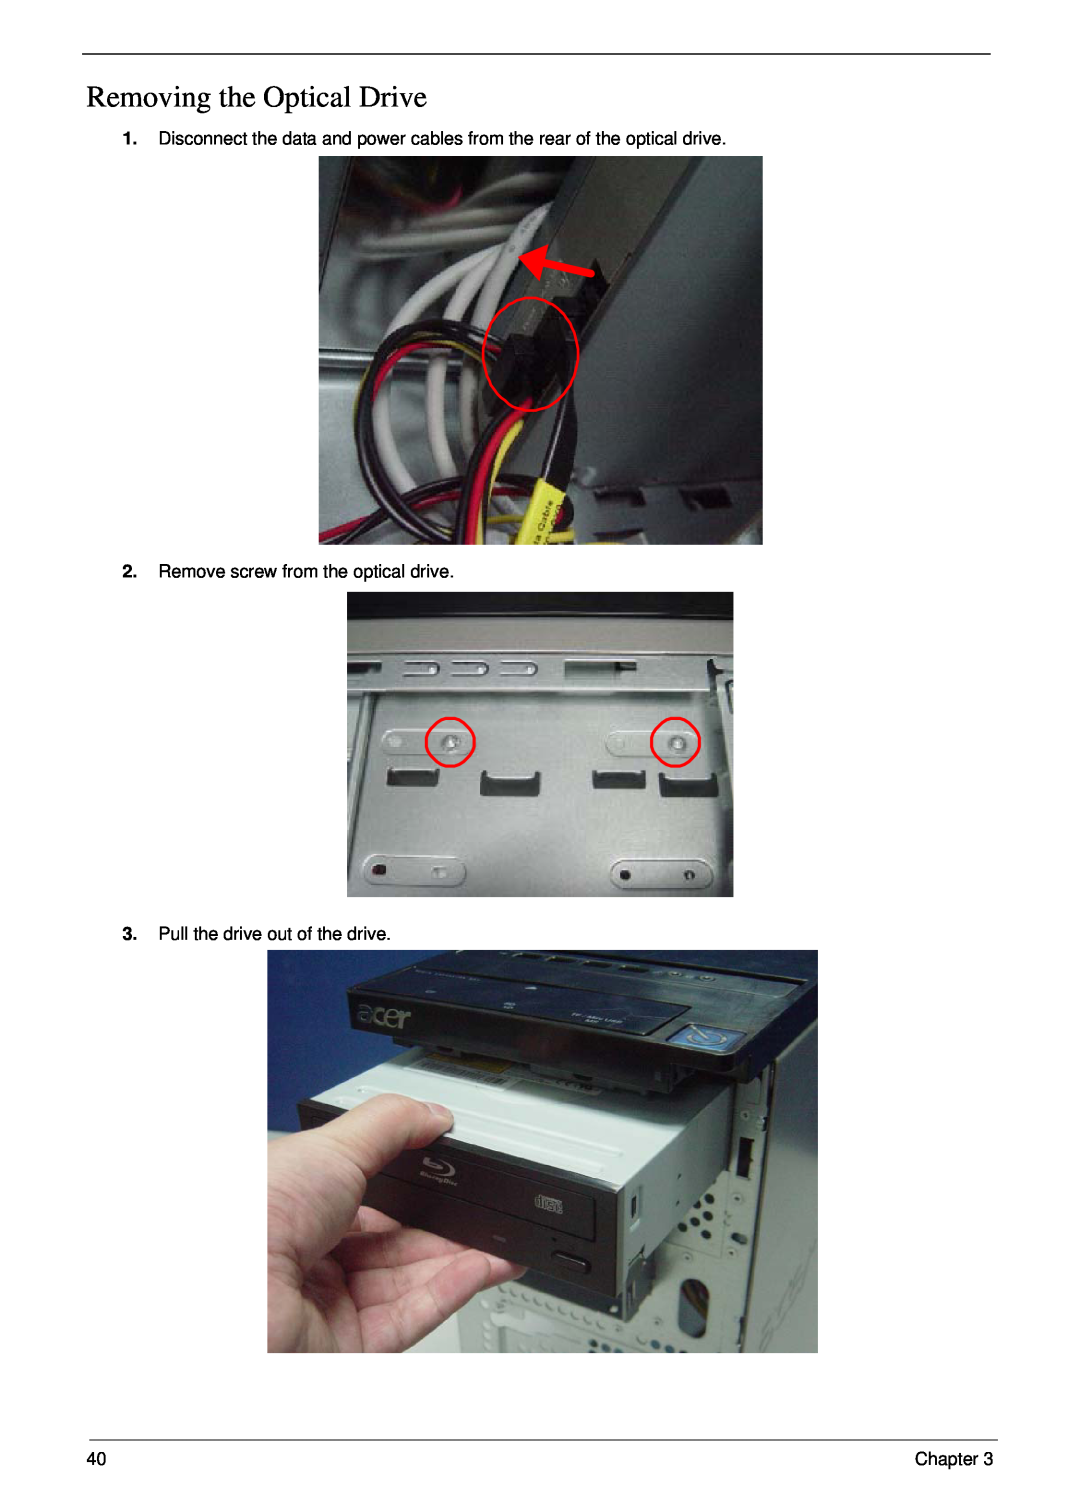 Acer m3400(g) manual Removing the Optical Drive, Remove screw from the optical drive, Pull the drive out of the drive 